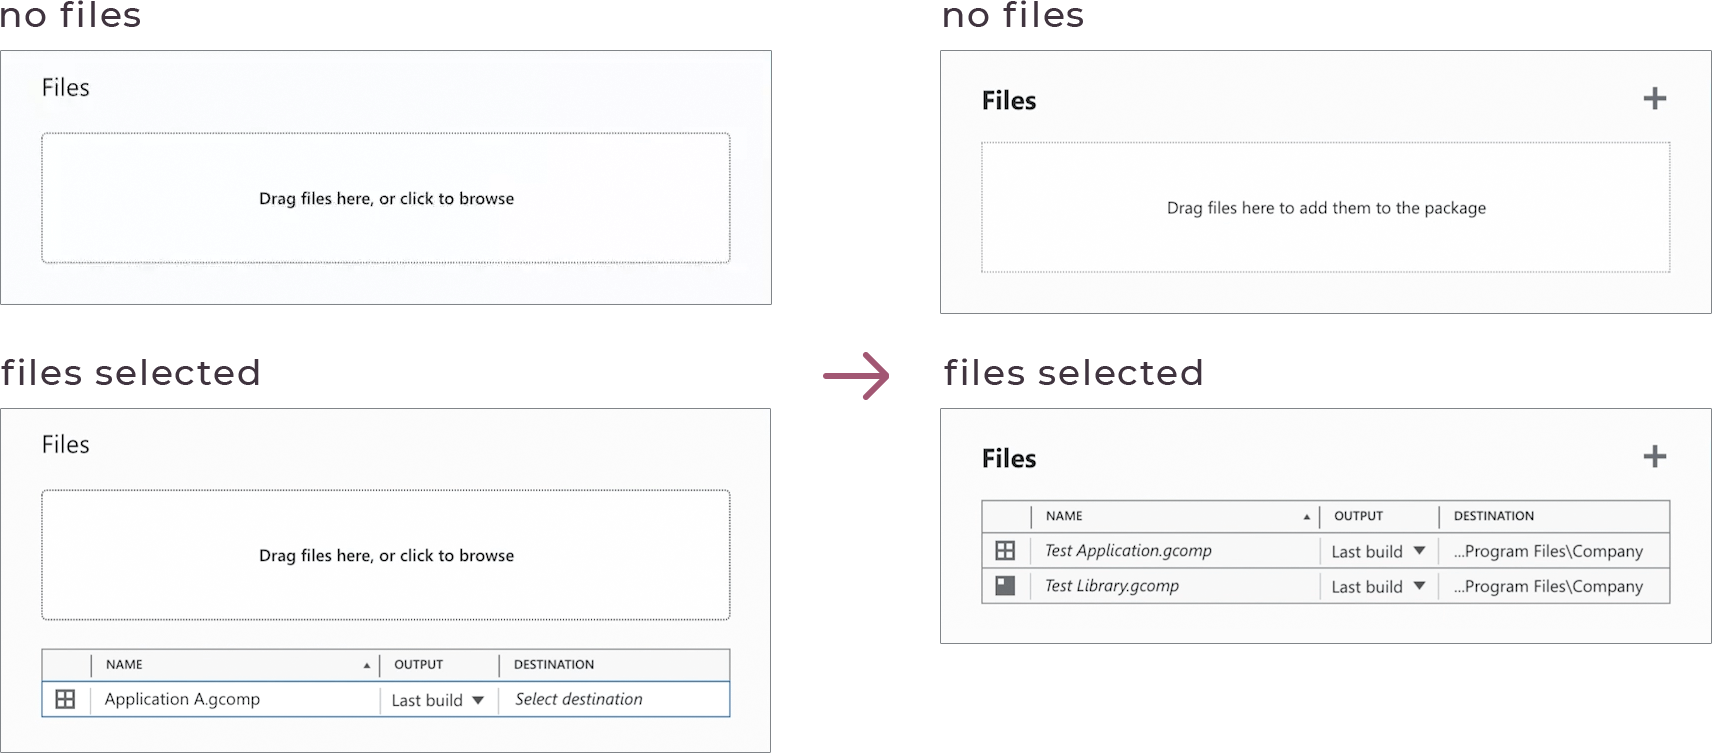 a before and after of a section of a wireframe for the files section showing both the empty state and the state with files selected; the before shows both the files table and the drag/drop target in the selected state, the after replaces the drag/drop target with the files table